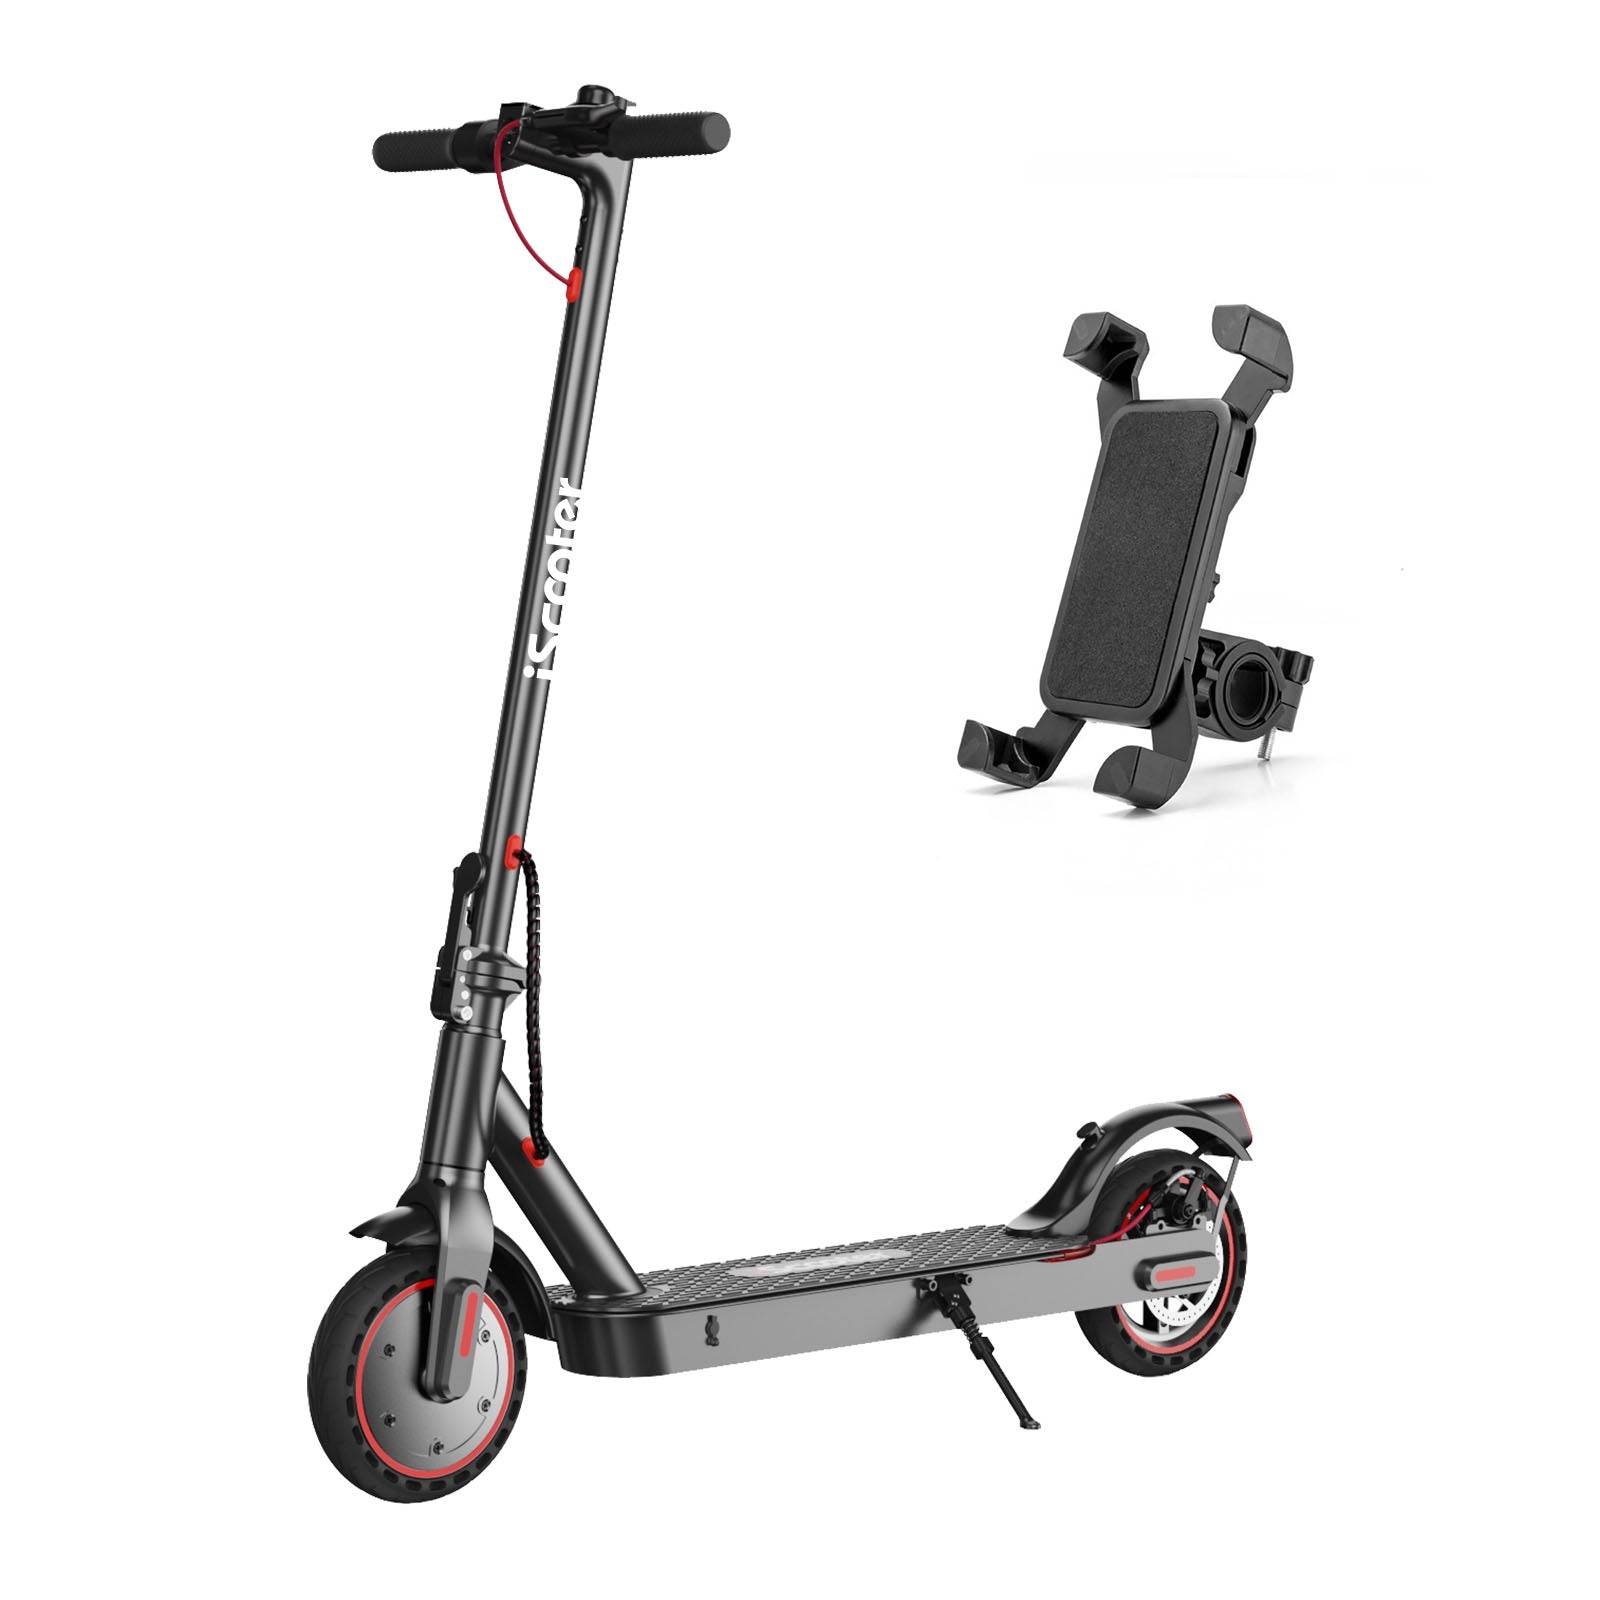 iScooter i9 Foldable Commuting Electric Scooter